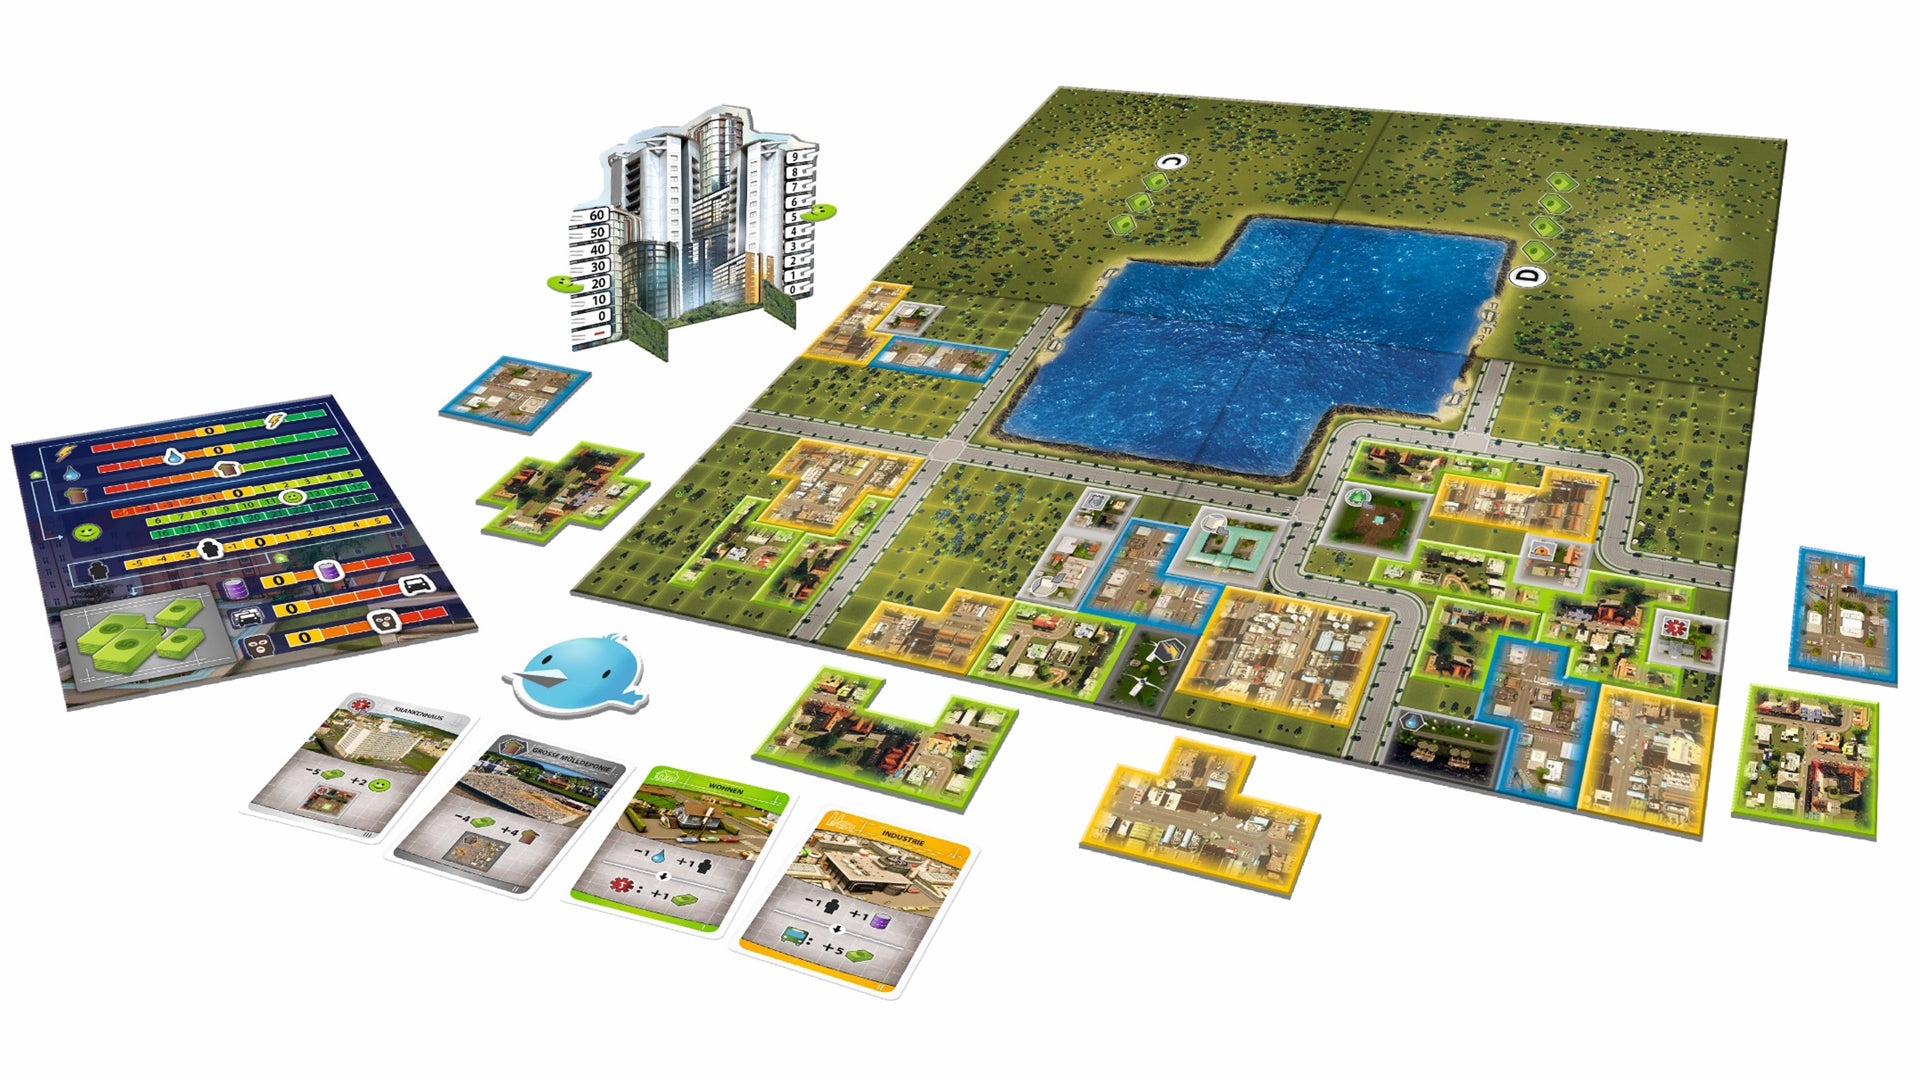 Cities: Skylines - The Board Game gameplay layout